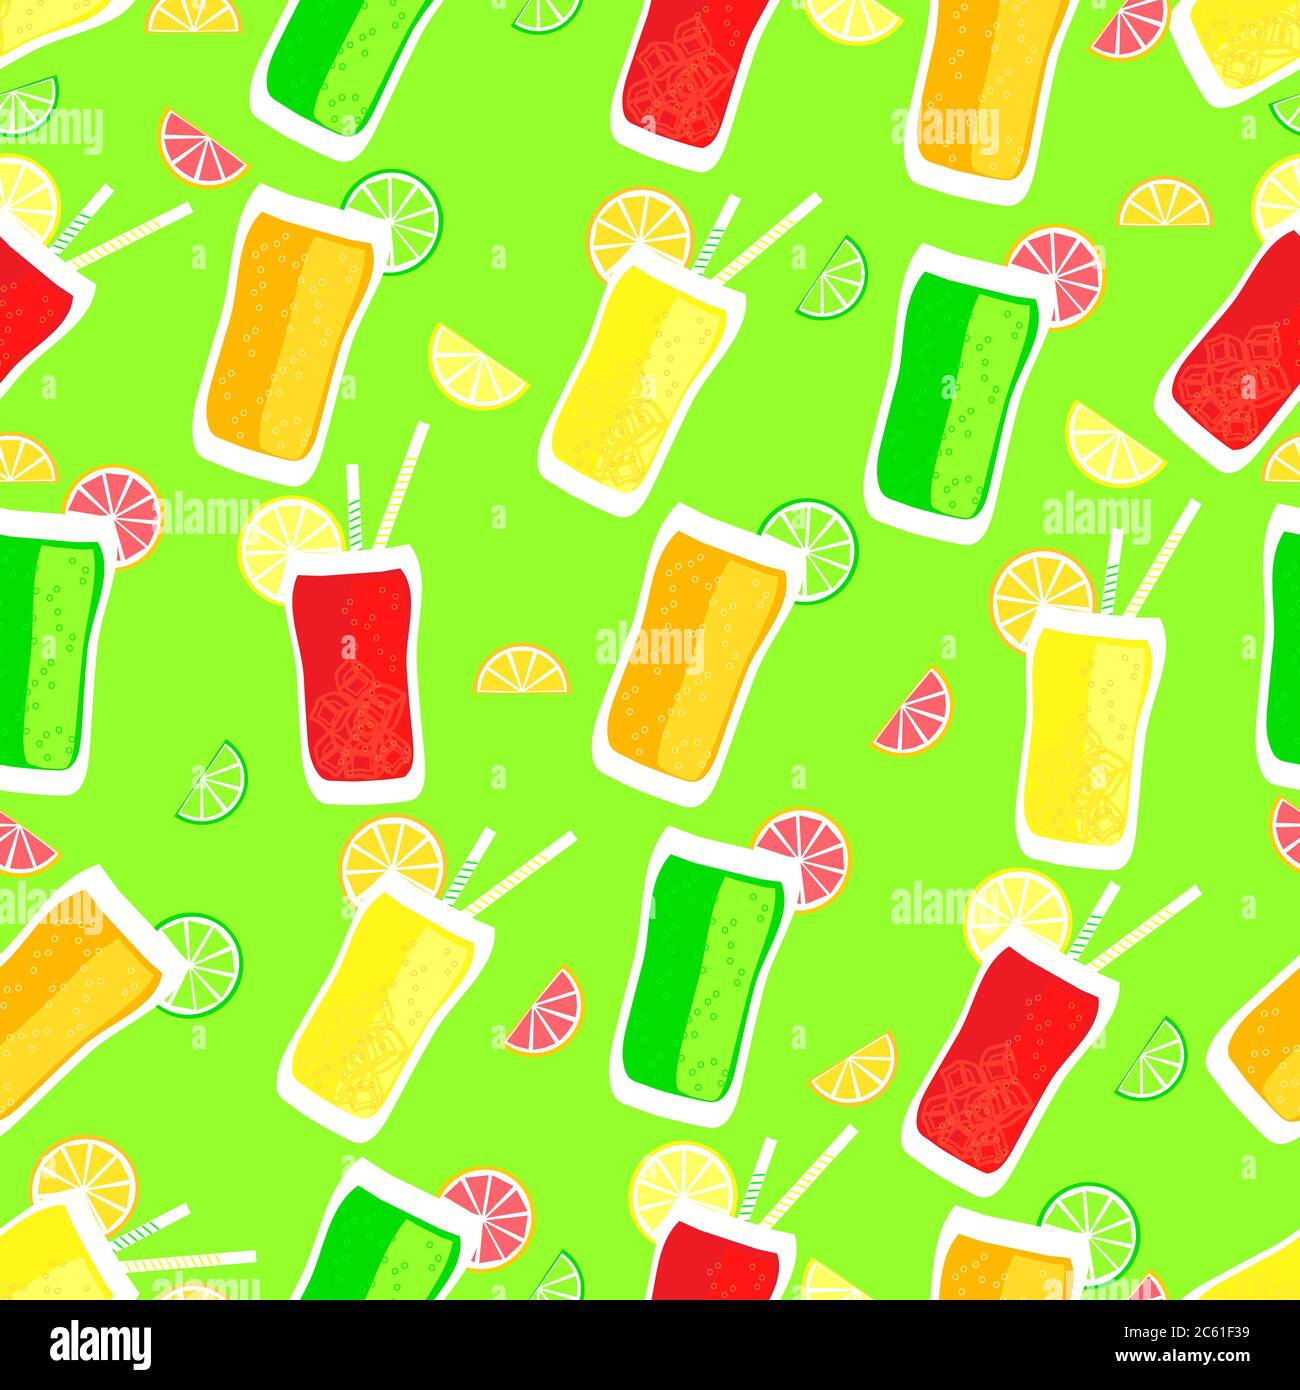 Cute drinks vector illustration background seamless pattern Stock Vector